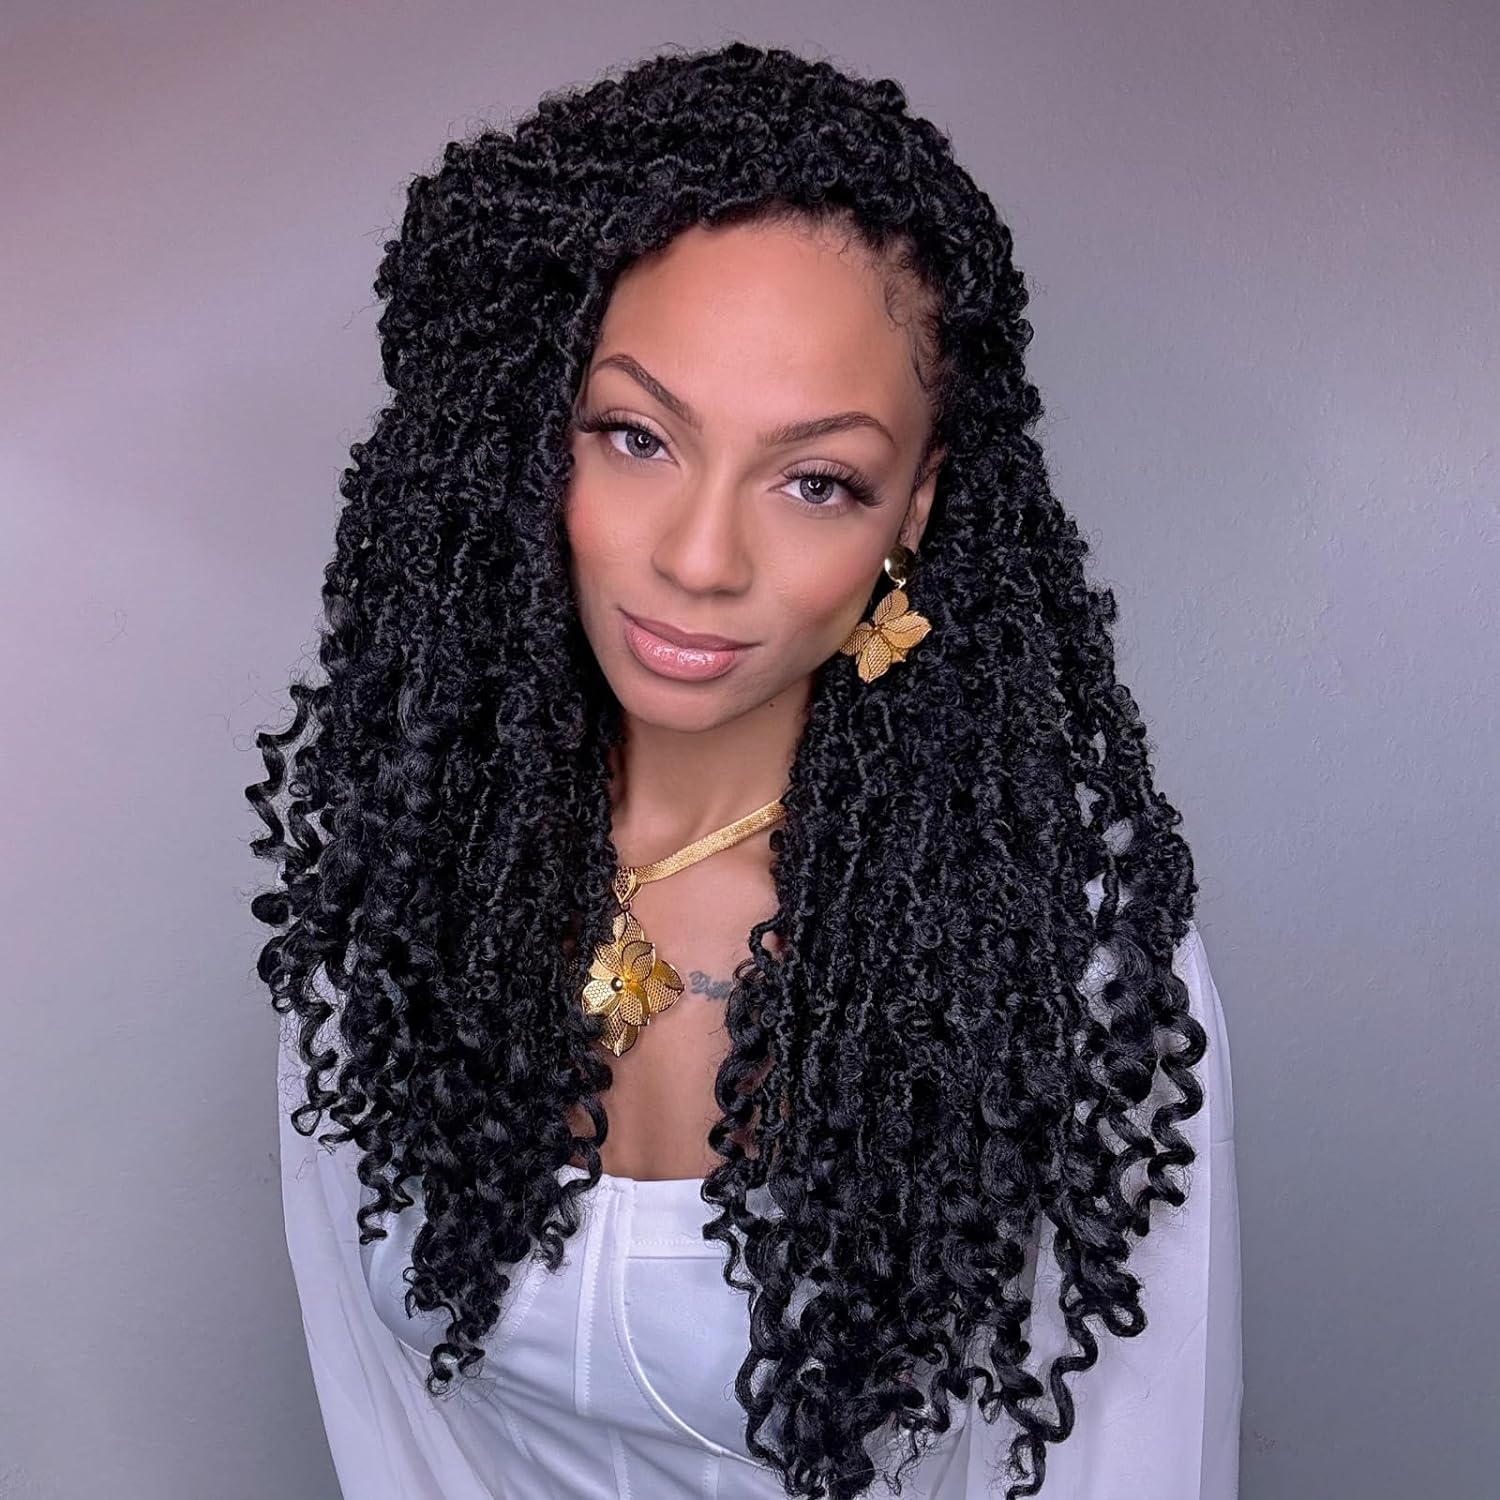 FAST SHIPPING 3-5 DAY BLC | Toyotress Butterfly Locs Crochet Hair With Curly Ends 8 Packs Soft Locs Pre-Looped Butterfly Locs Butterfly Faux Locs Synthetic Hair Extensions